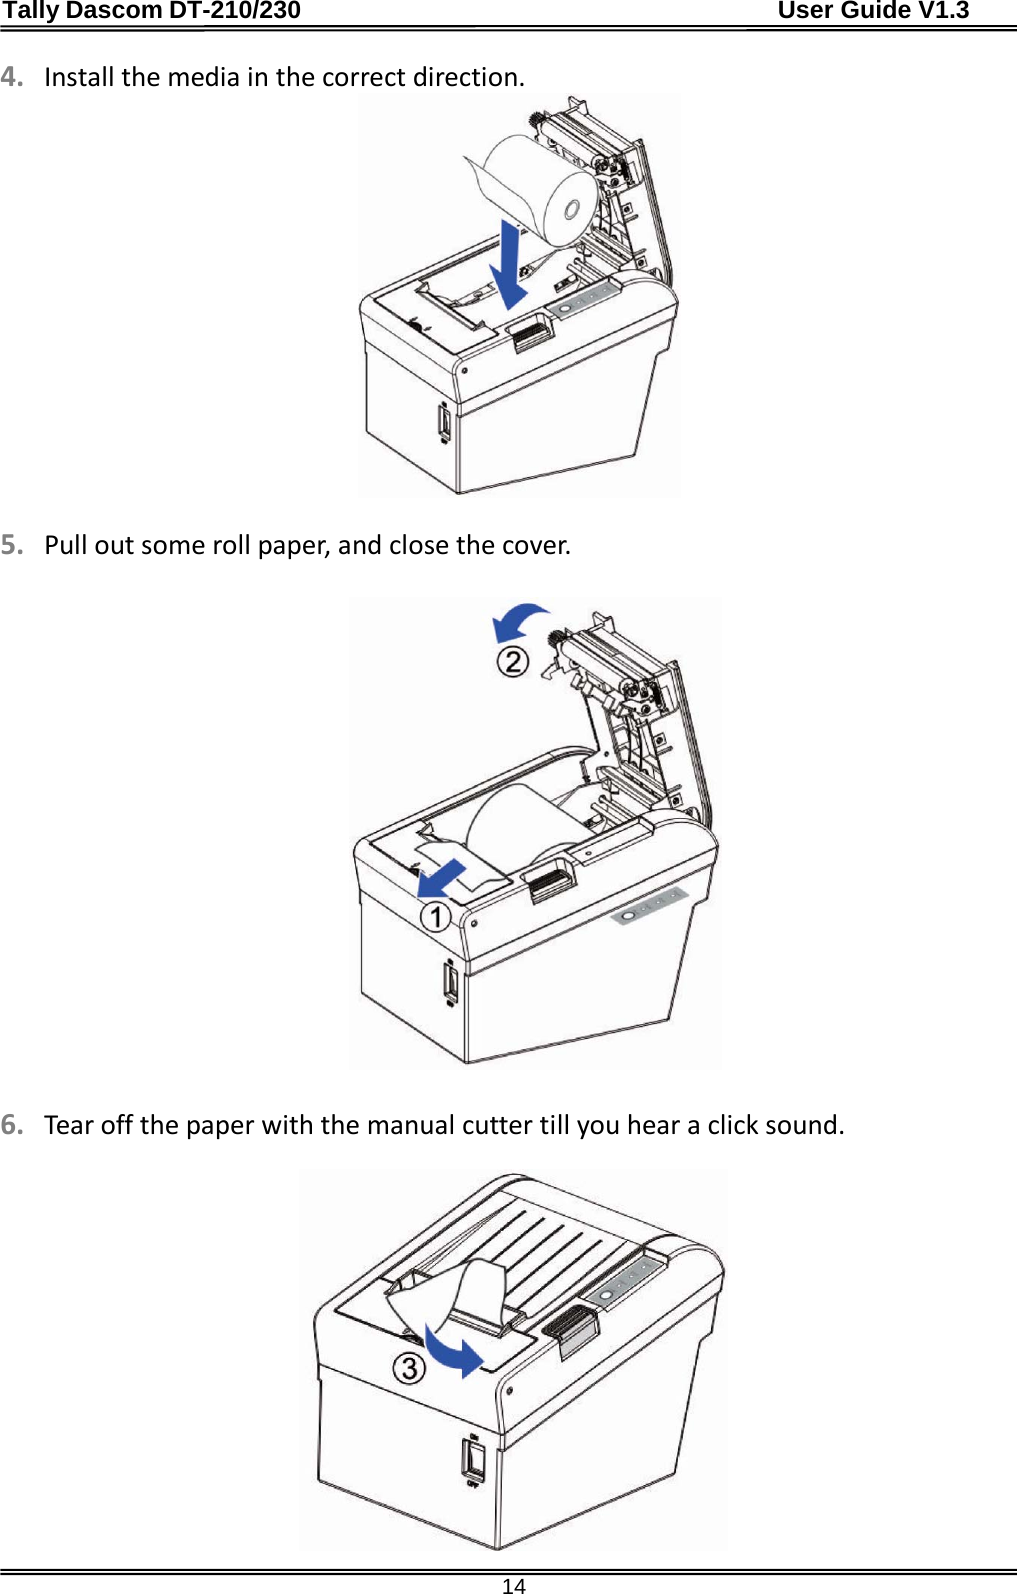 Tally Dascom DT-210/230                                      User Guide V1.3  14 4. Install the media in the correct direction.   5. Pull out some roll paper, and close the cover.    6. Tear off the paper with the manual cutter till you hear a click sound.   